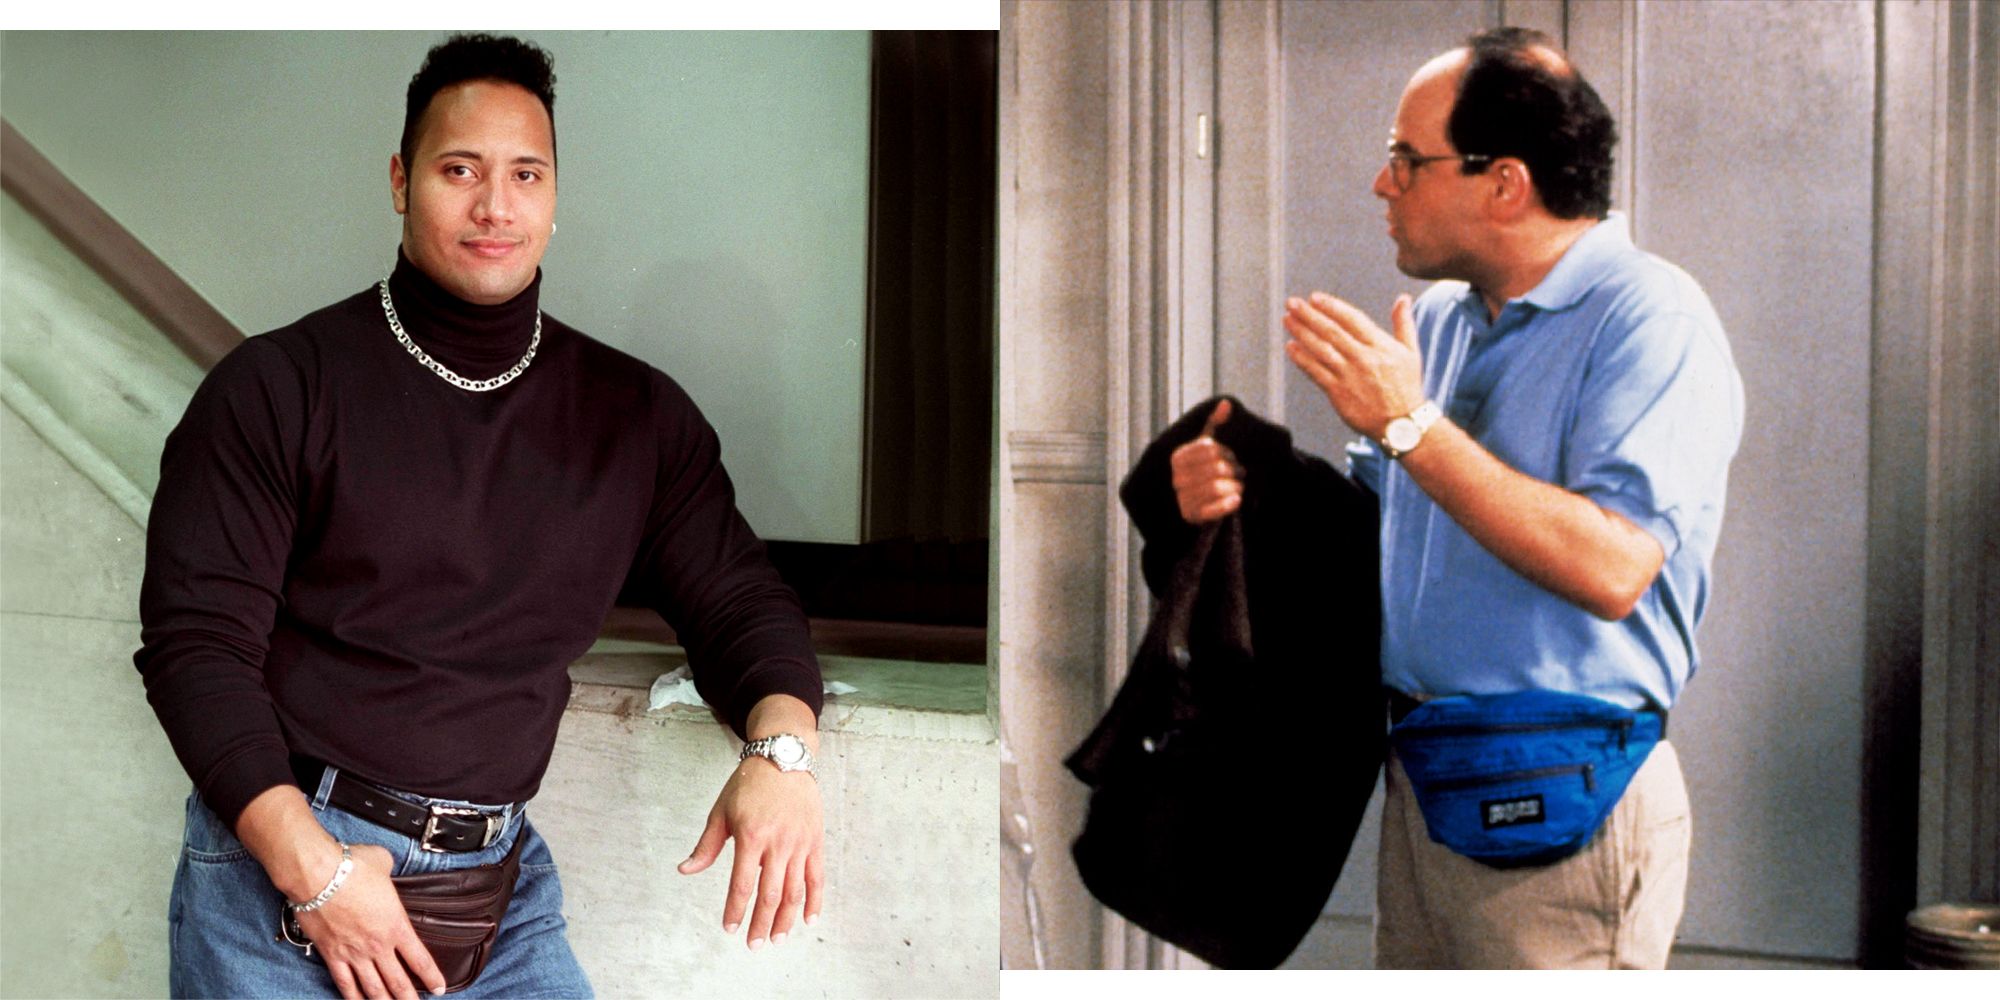 Can You Wear a Fanny Pack?